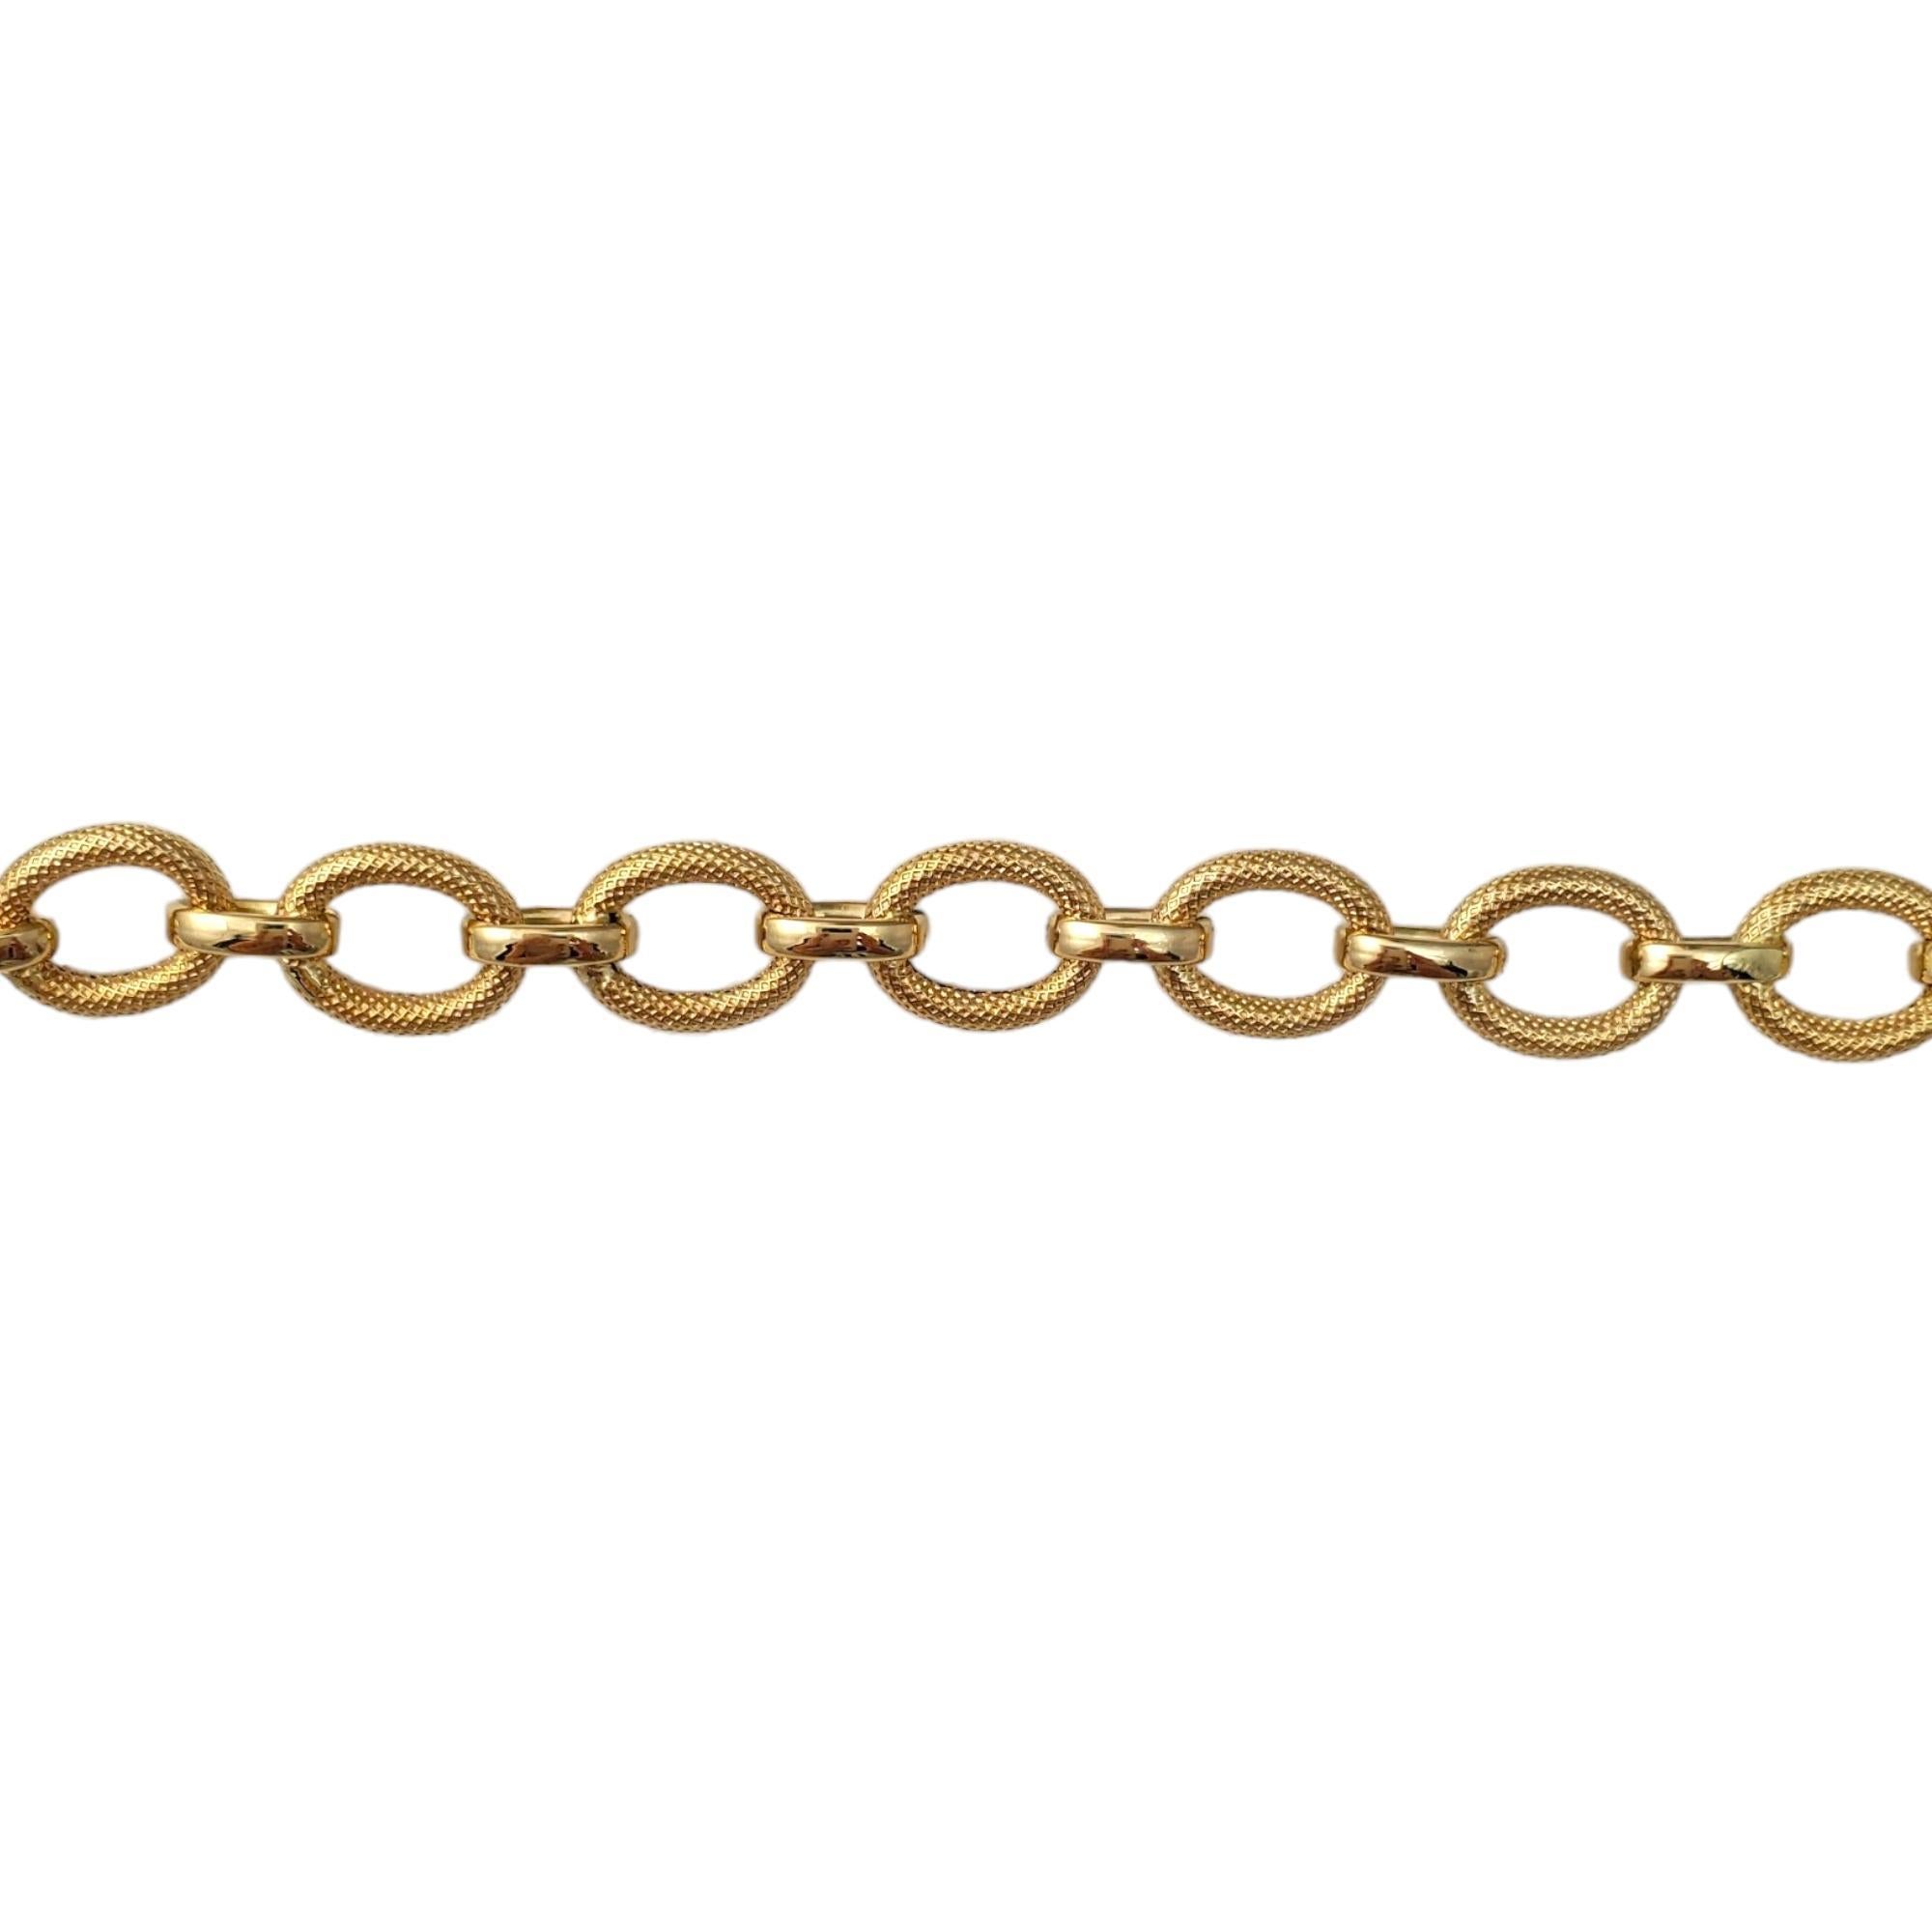 Women's 18K Yellow Gold Textured Link Chain Bracelet #16516 For Sale